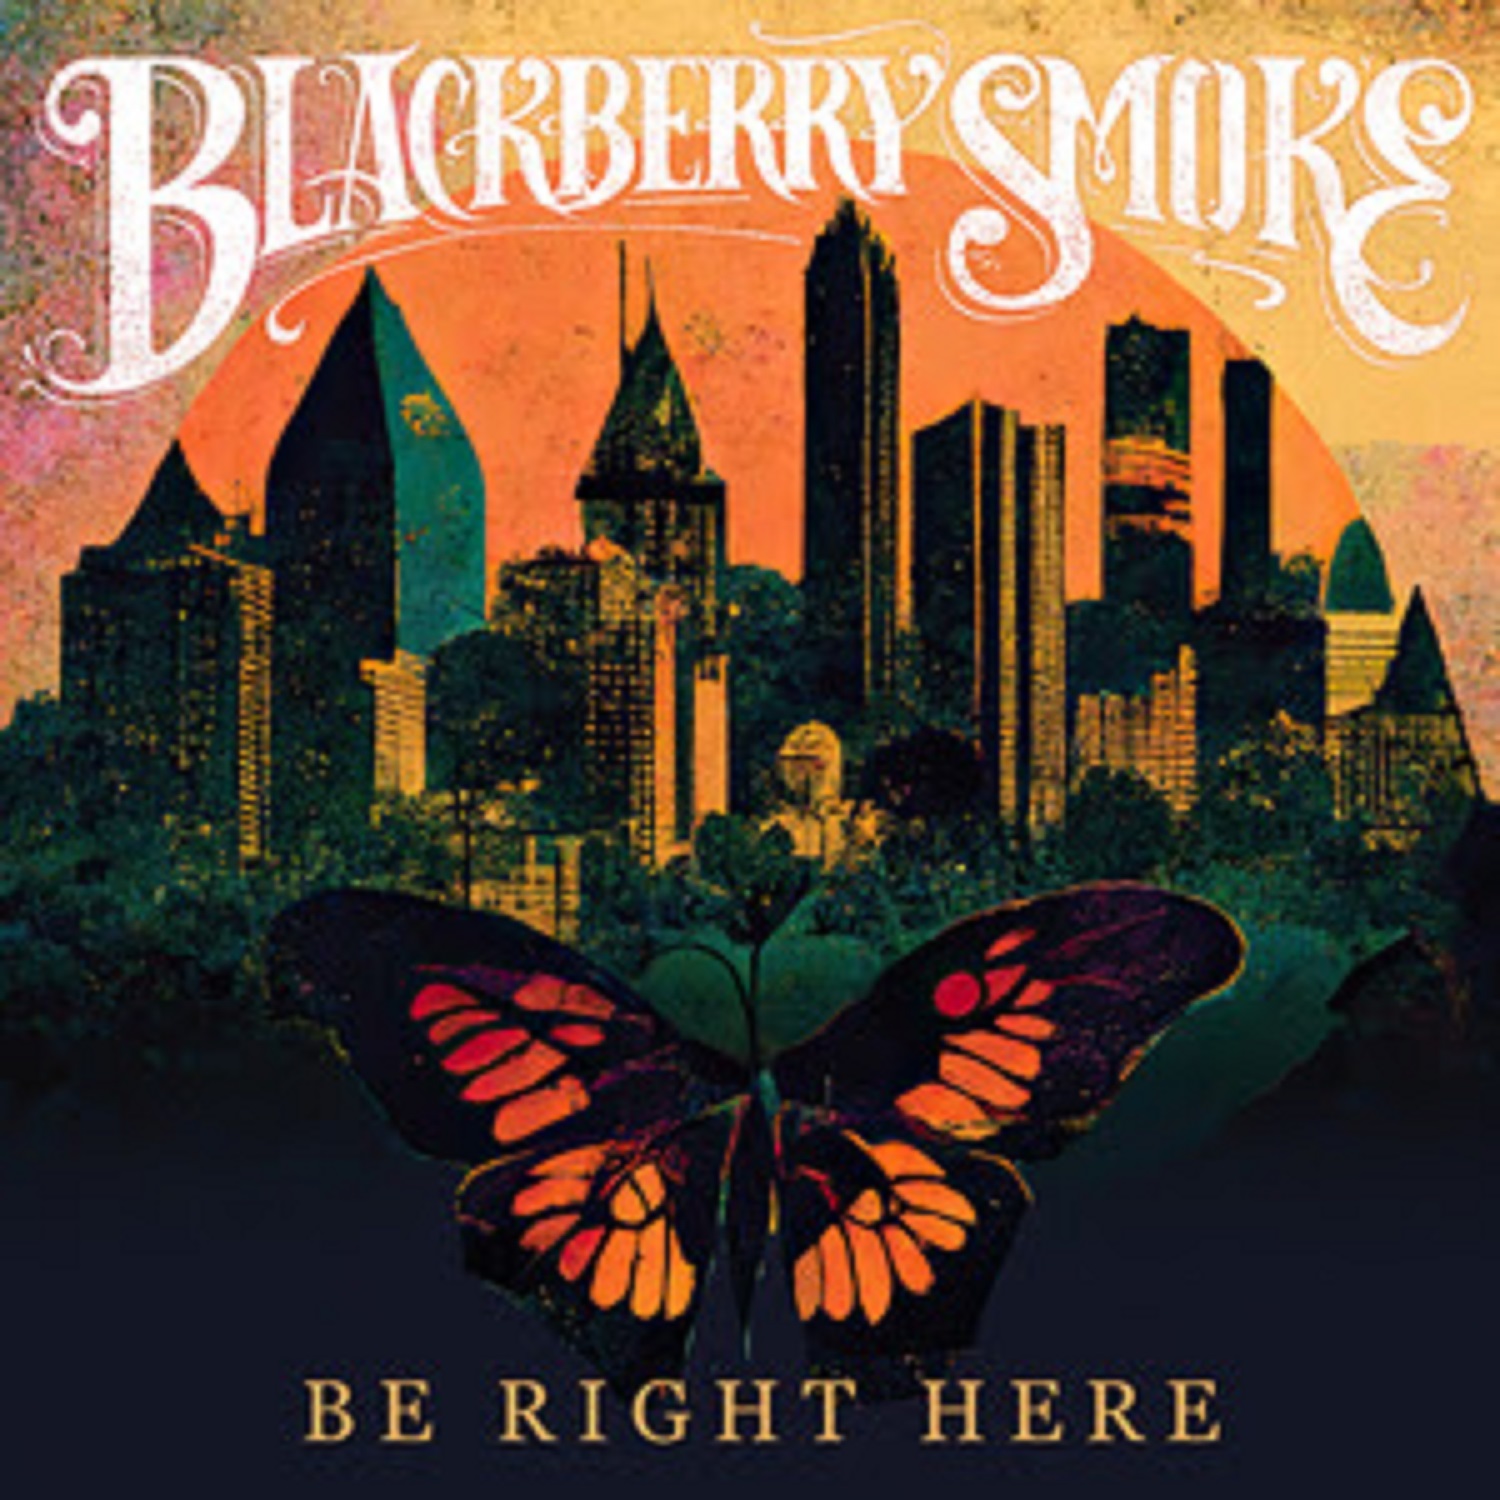 Blackberry Smoke's new album "Be Right Here" debuts at #1 on Current Country Albums, Americana/Folk Albums and Current Rock Albums Charts